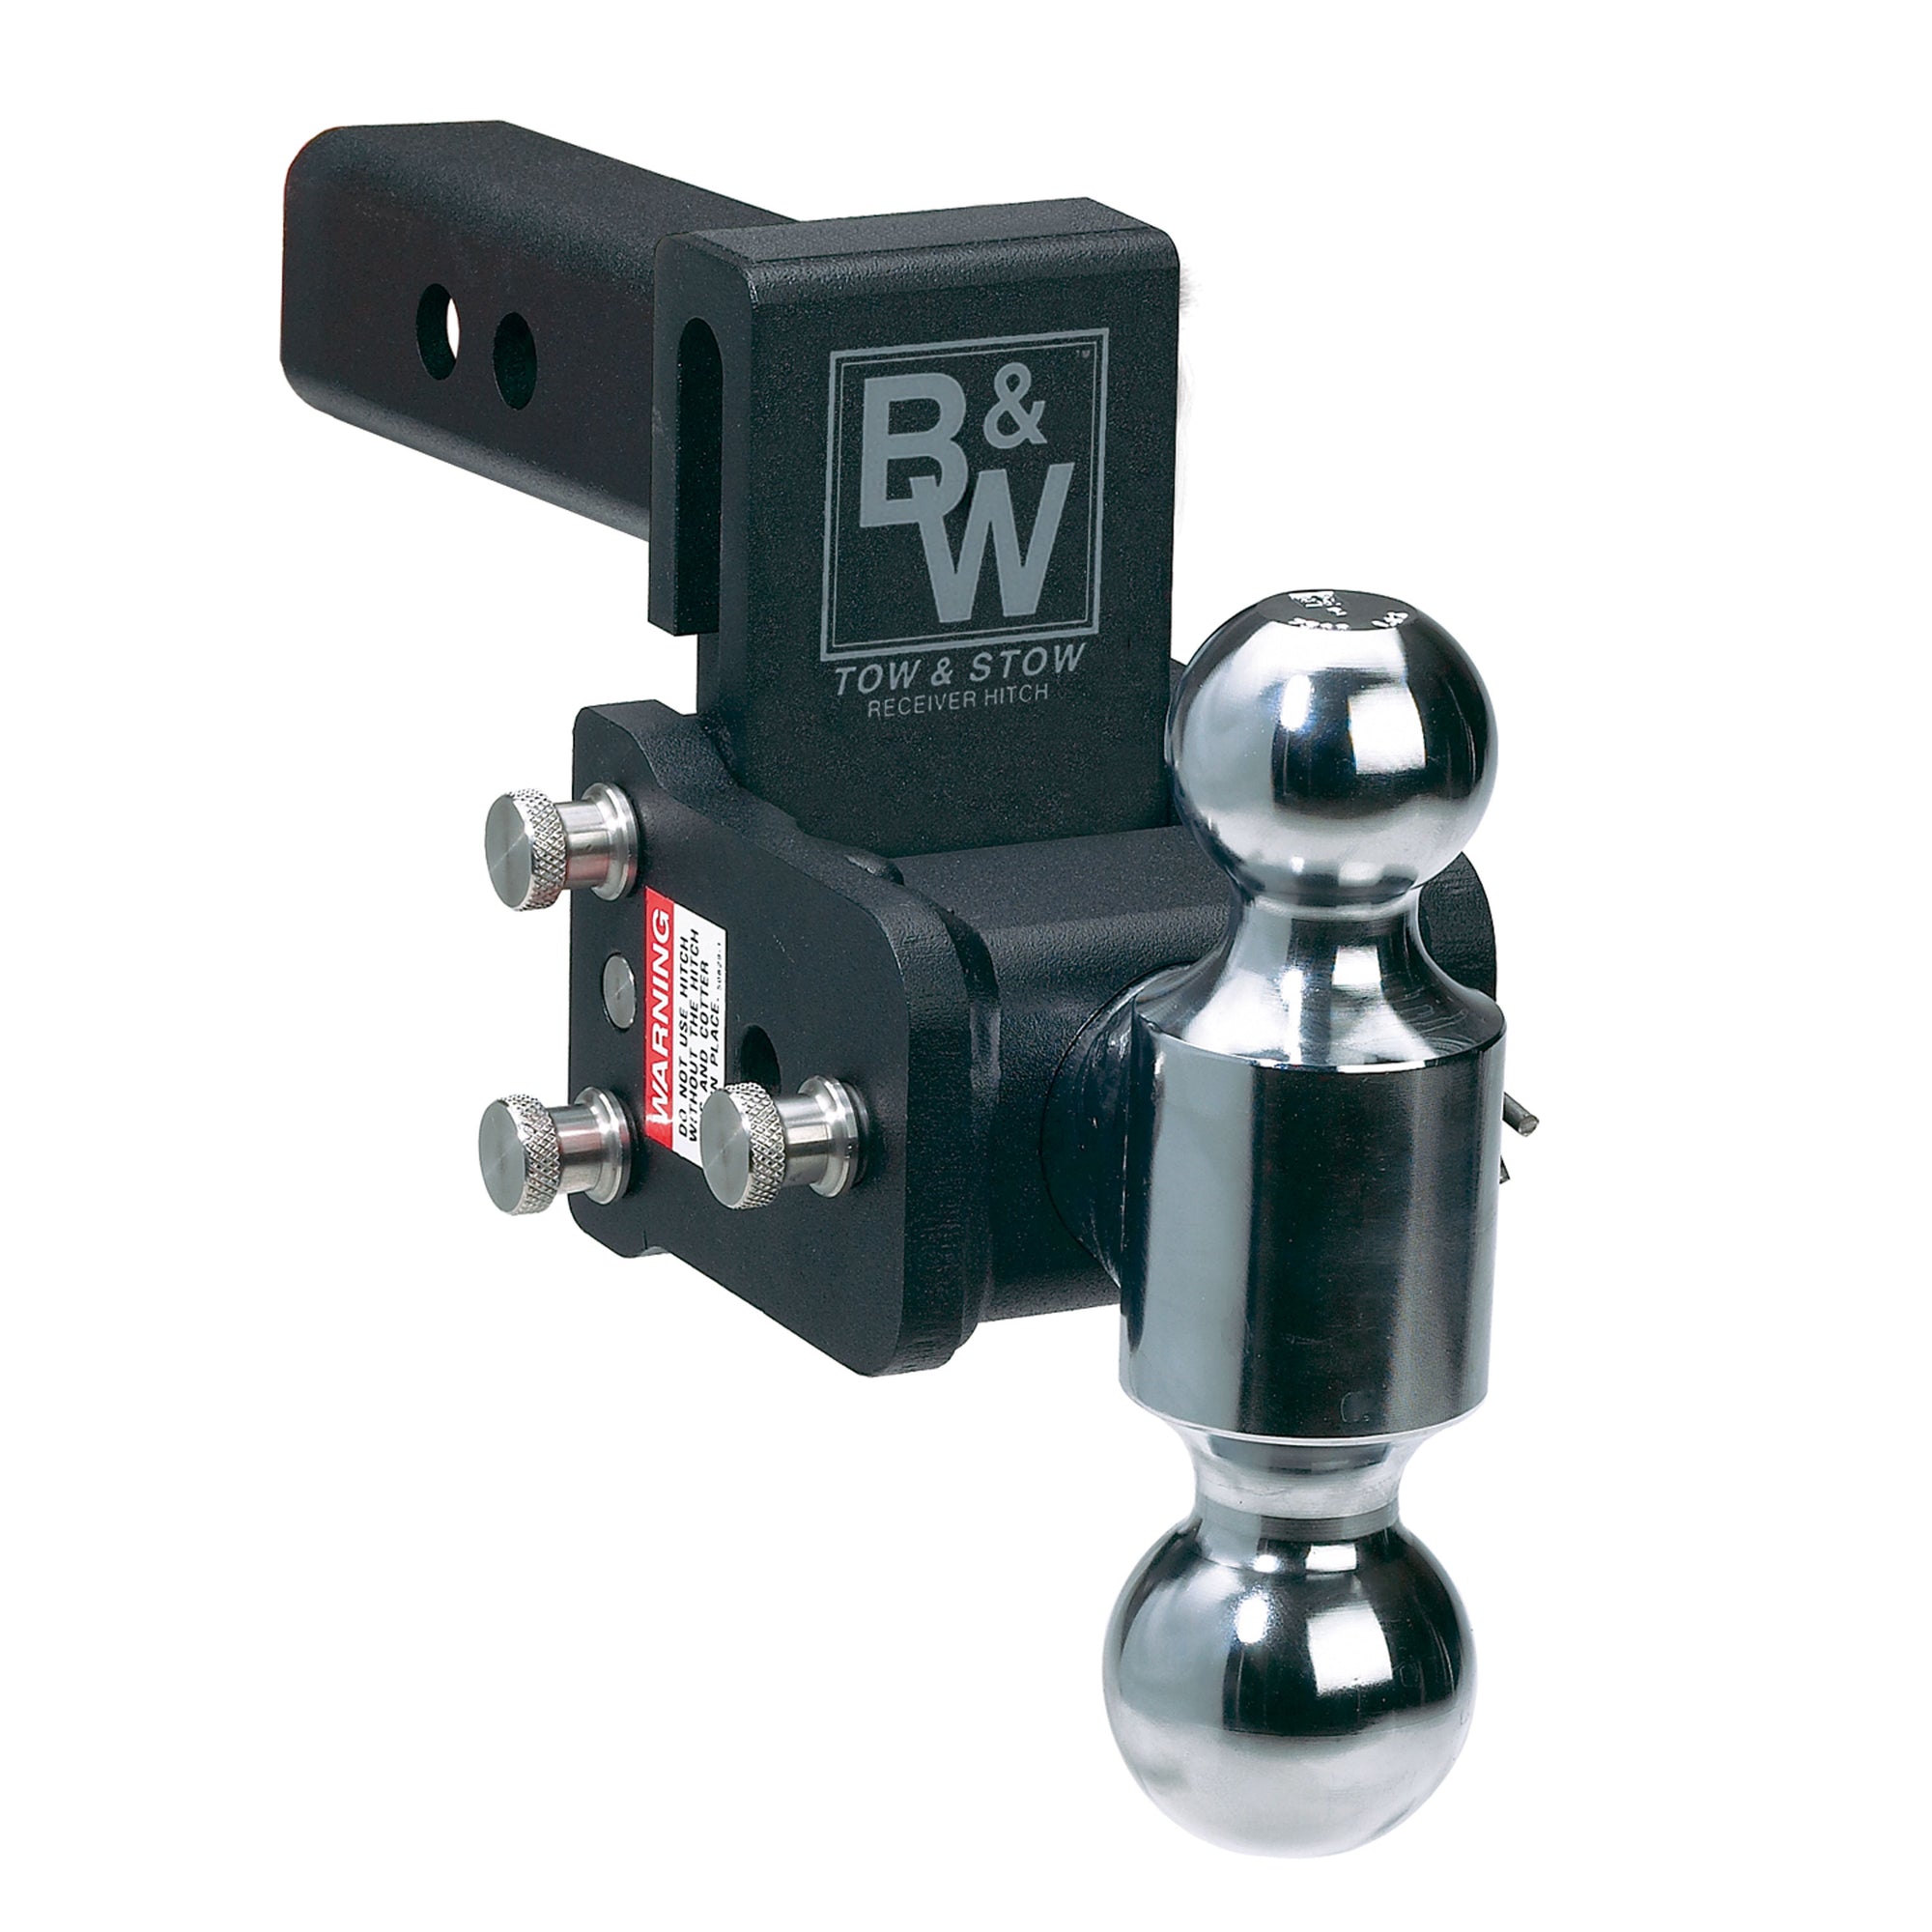 B&W Trailer Hitches TS20040B Tow and Stow Adjustable Ball Mount - 2-5/16" & 2" Ball, 7" Drop, 7.5" Rise, Black